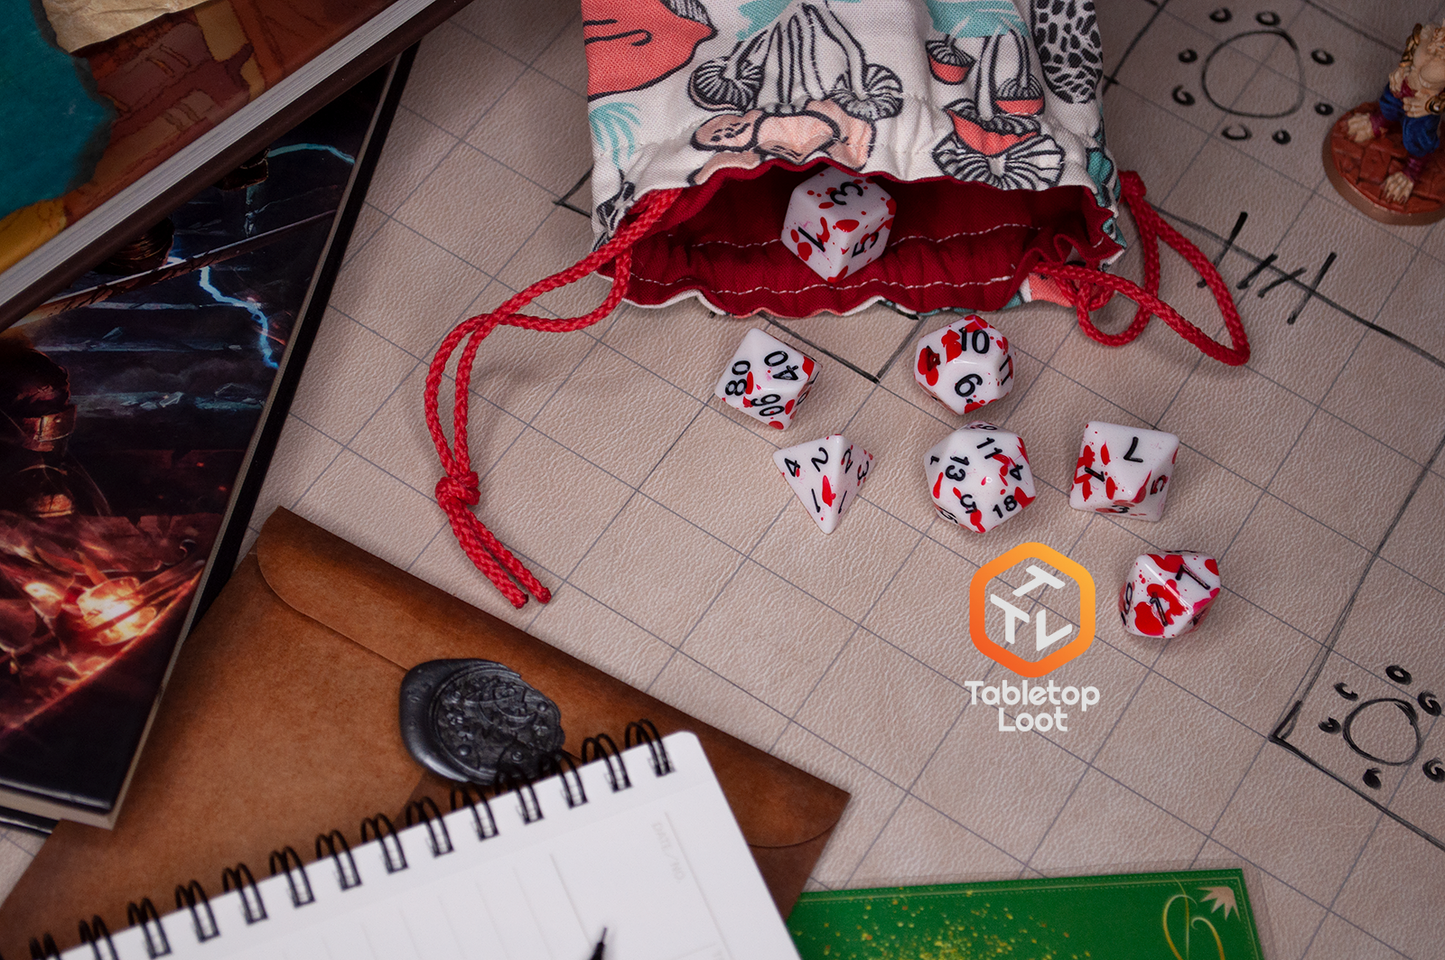 The Tavern Brawl 7 piece dice set from Tabletop Loot with red fake blood on white dice with black numbering.